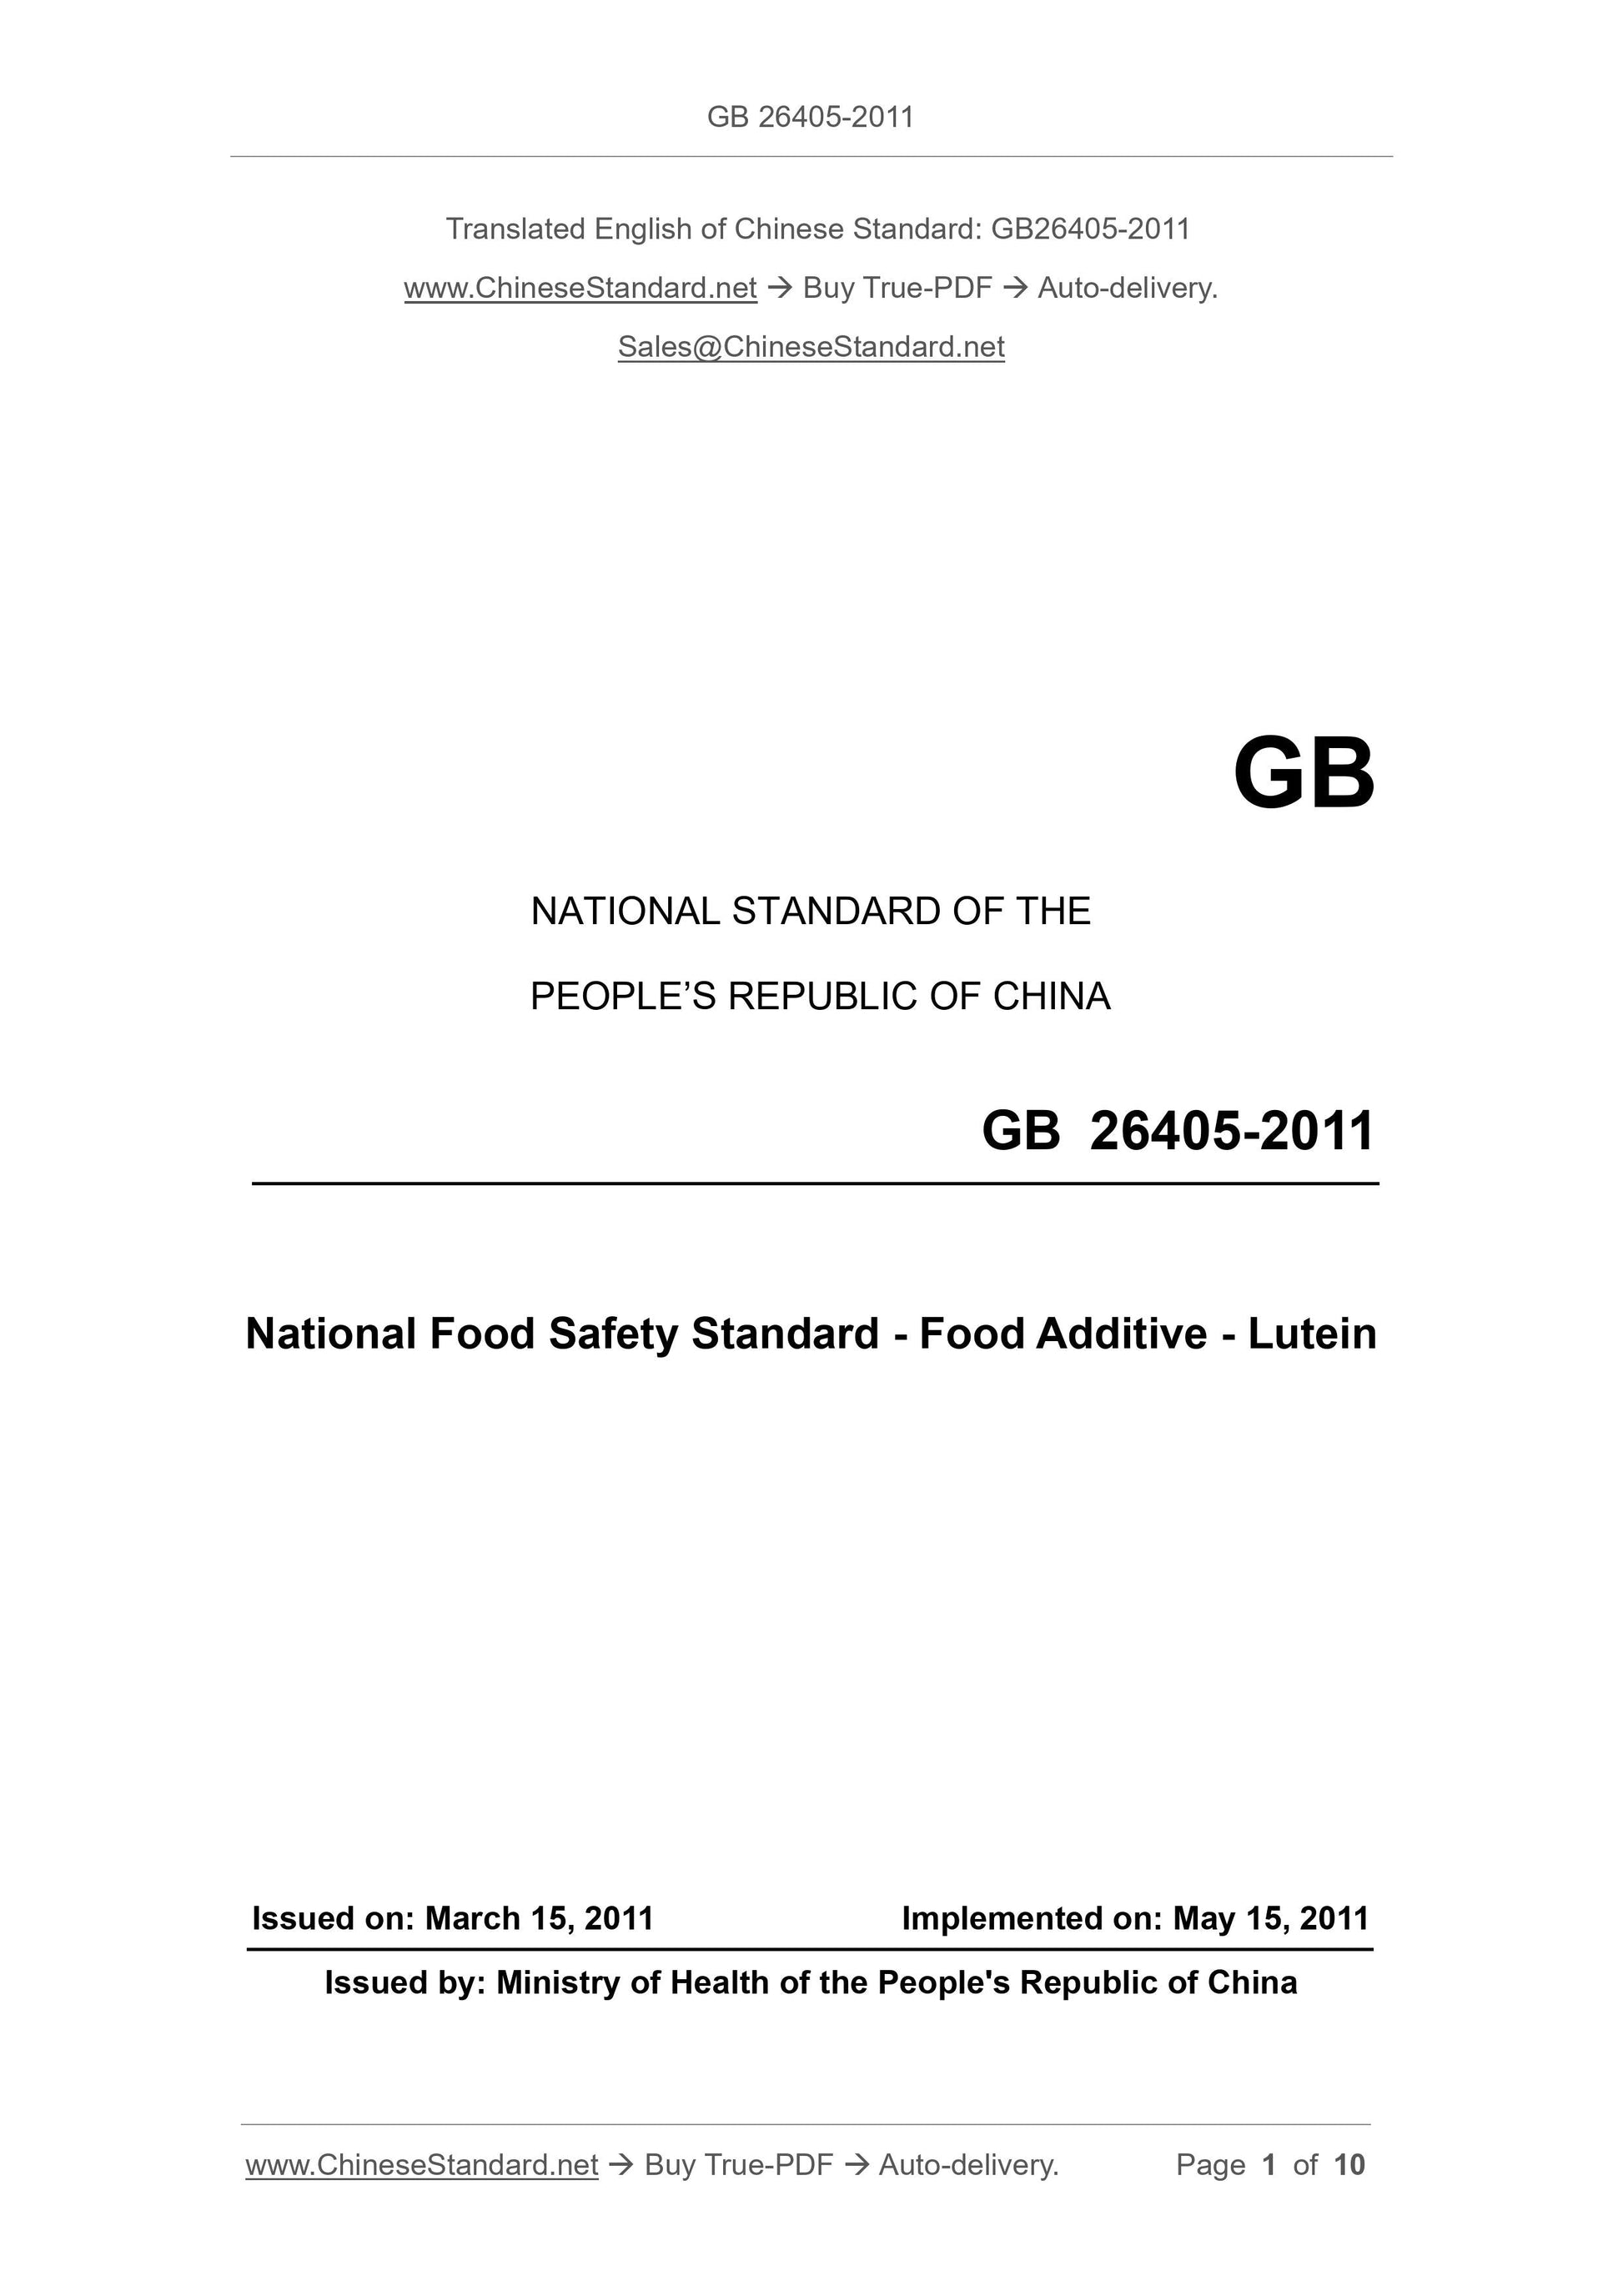 GB 26405-2011 Page 1